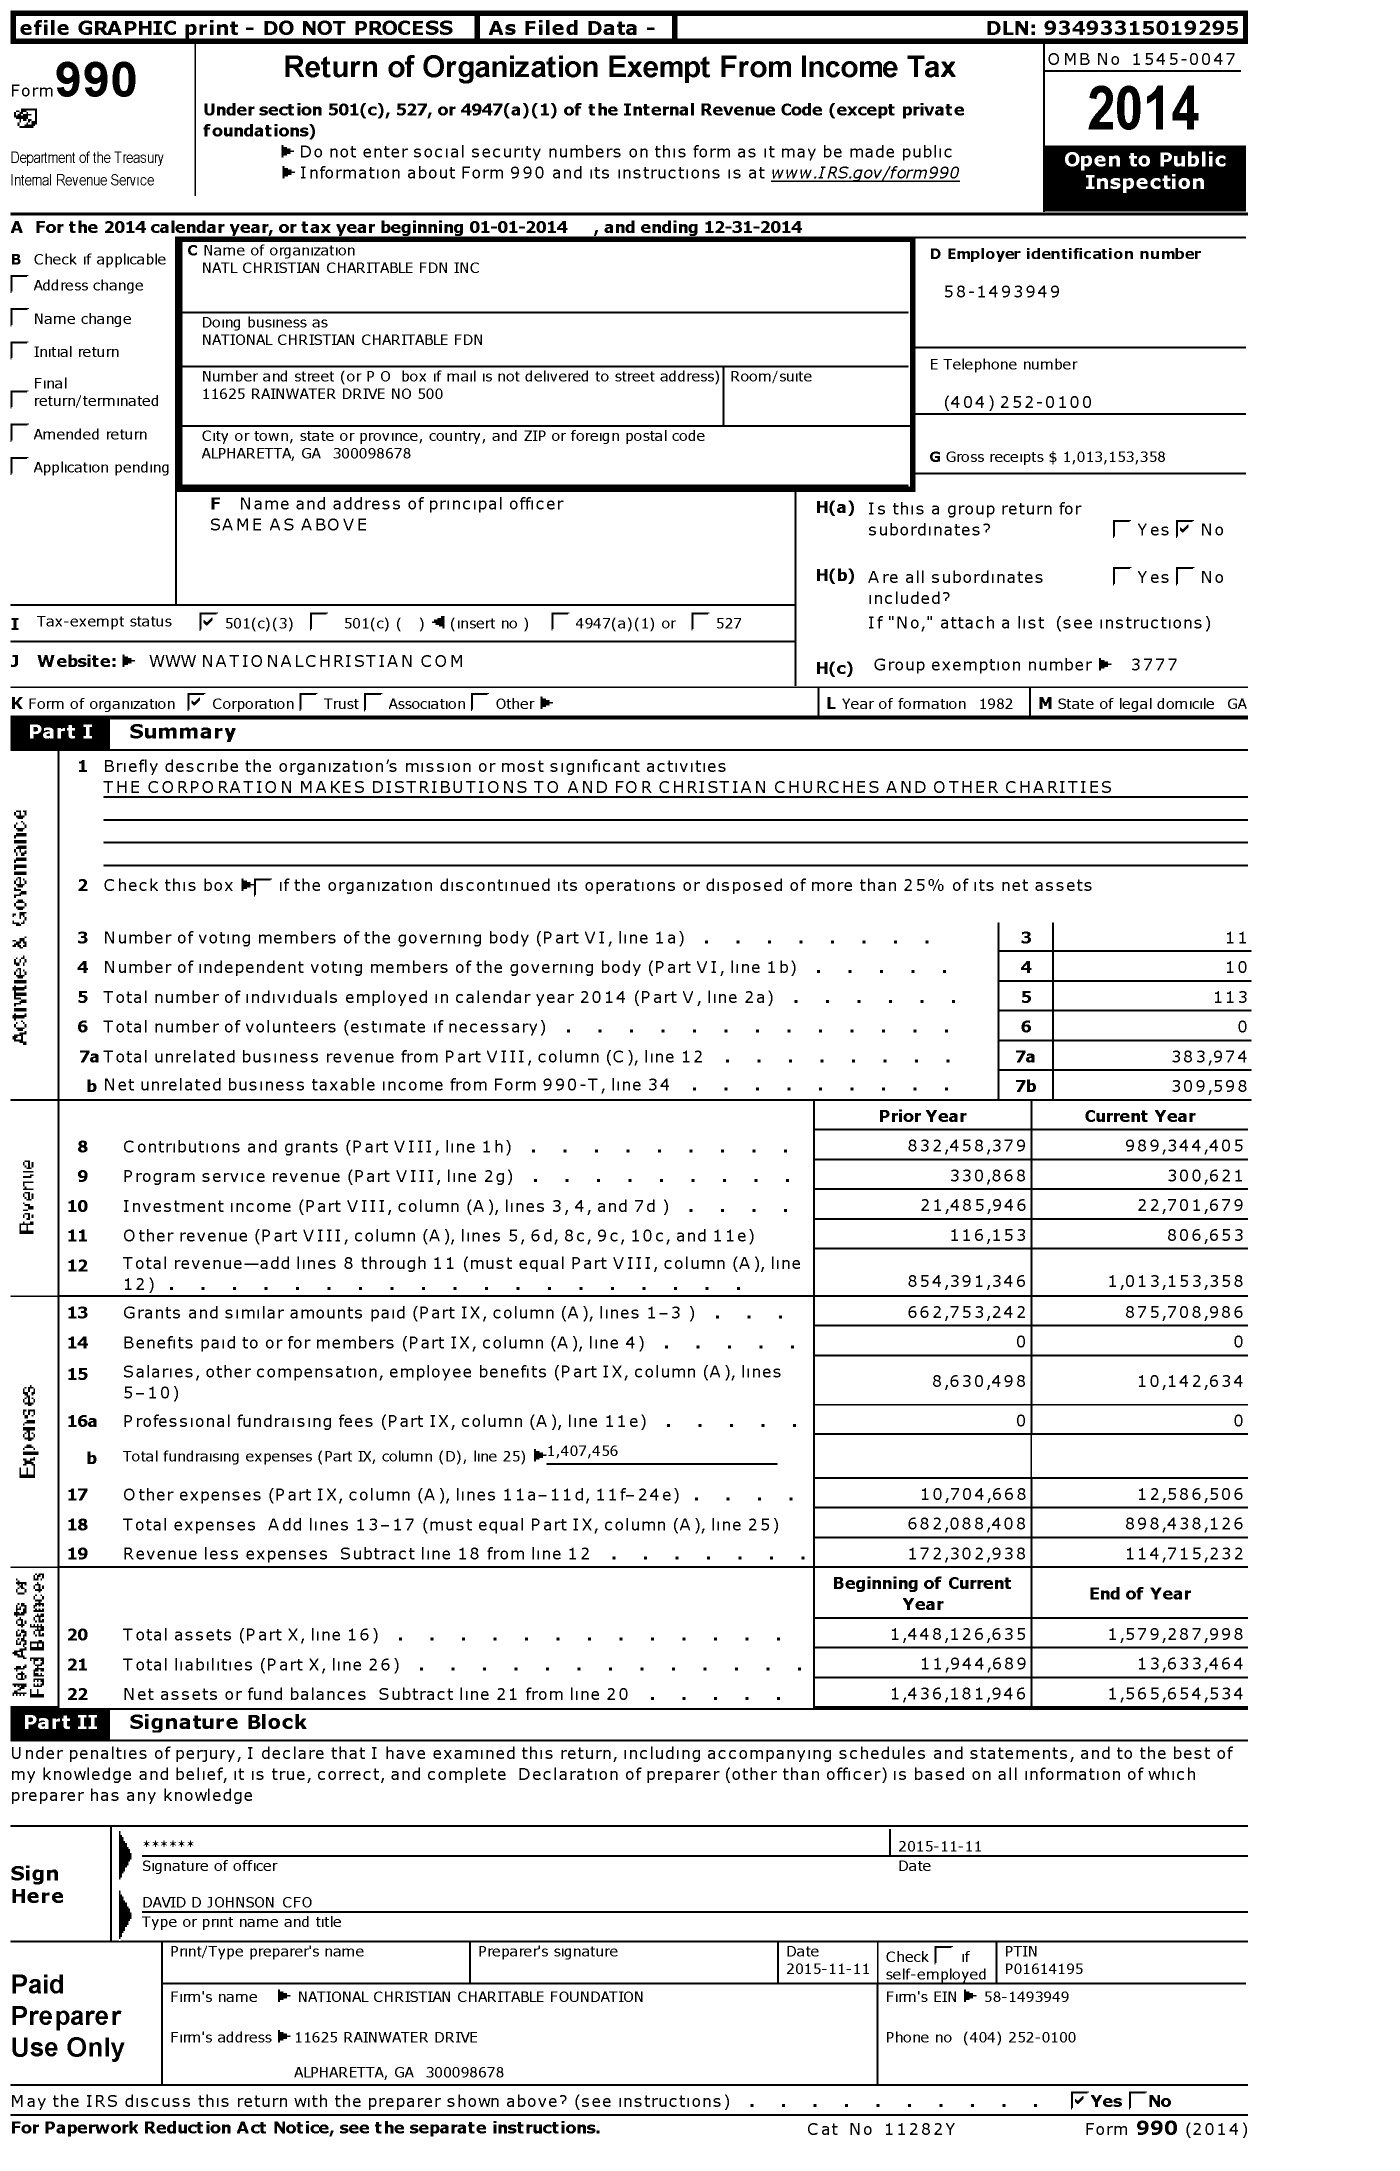 Image of first page of 2014 Form 990 for National Christian Foundation / Natl Christian Charitable FDN Inc